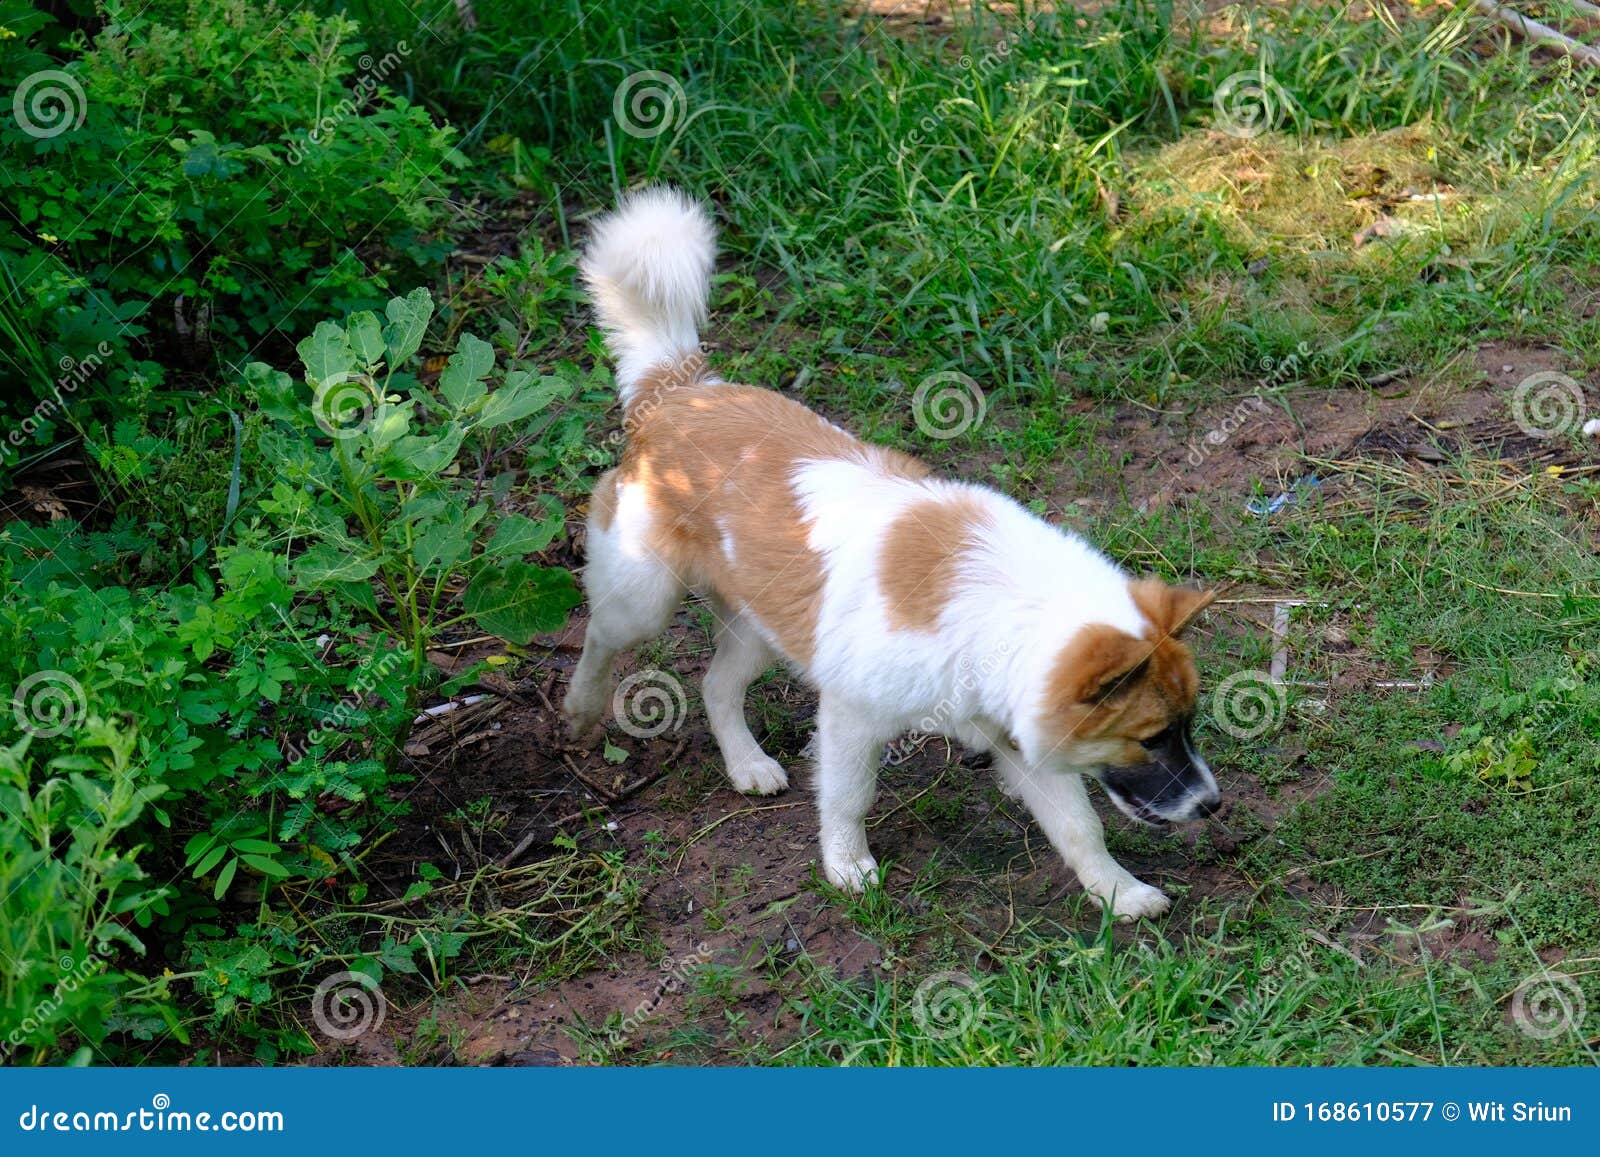 Thai Bangkaew Dog Brown And White Color Resting In Garden Stock Image Image Of Bangkaew Color 168610577